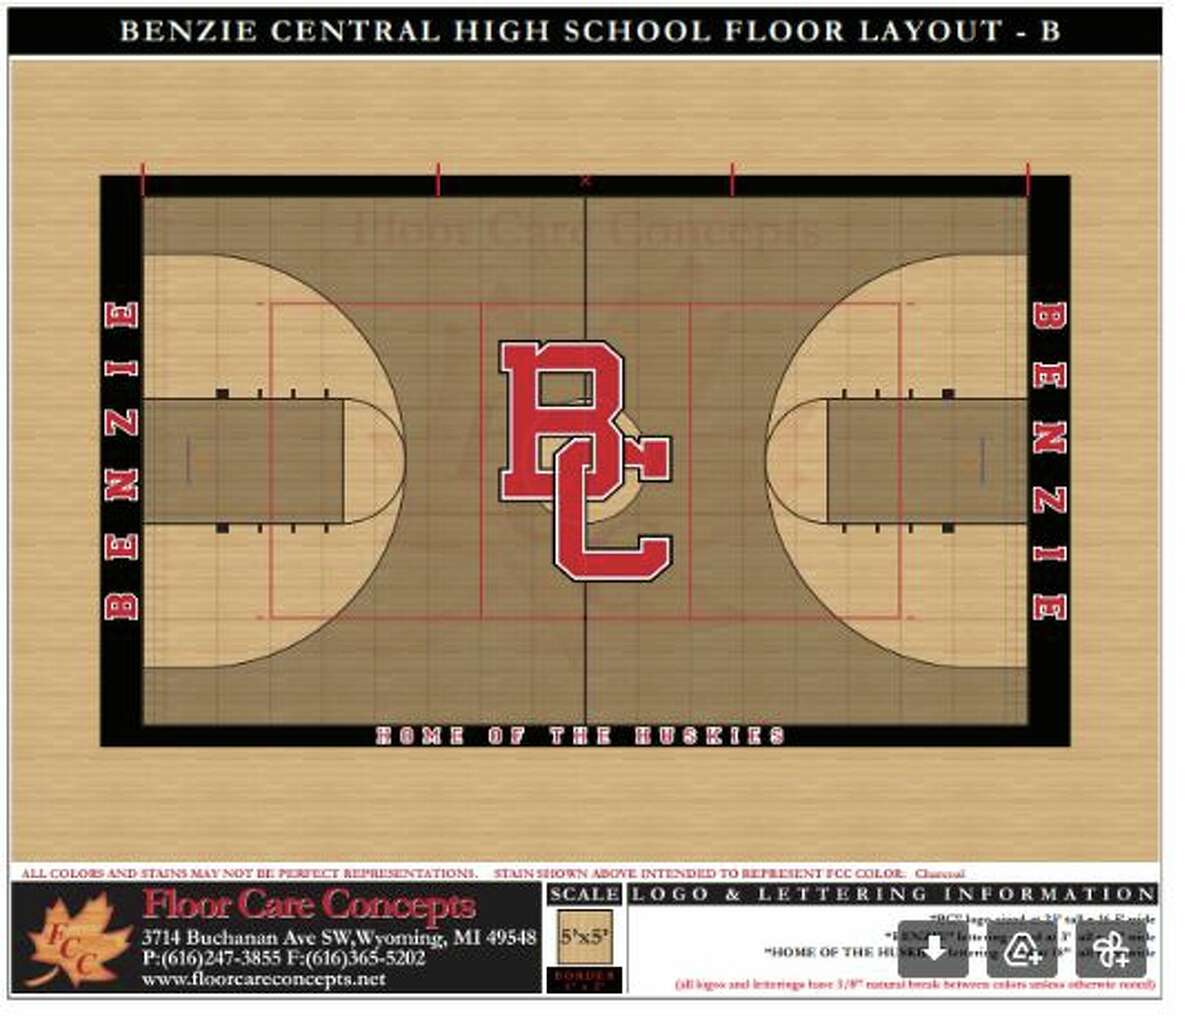 The design chosen for the new gym floor at Benzie Central High School features the "BC" logo centered in red and outlined in white. 